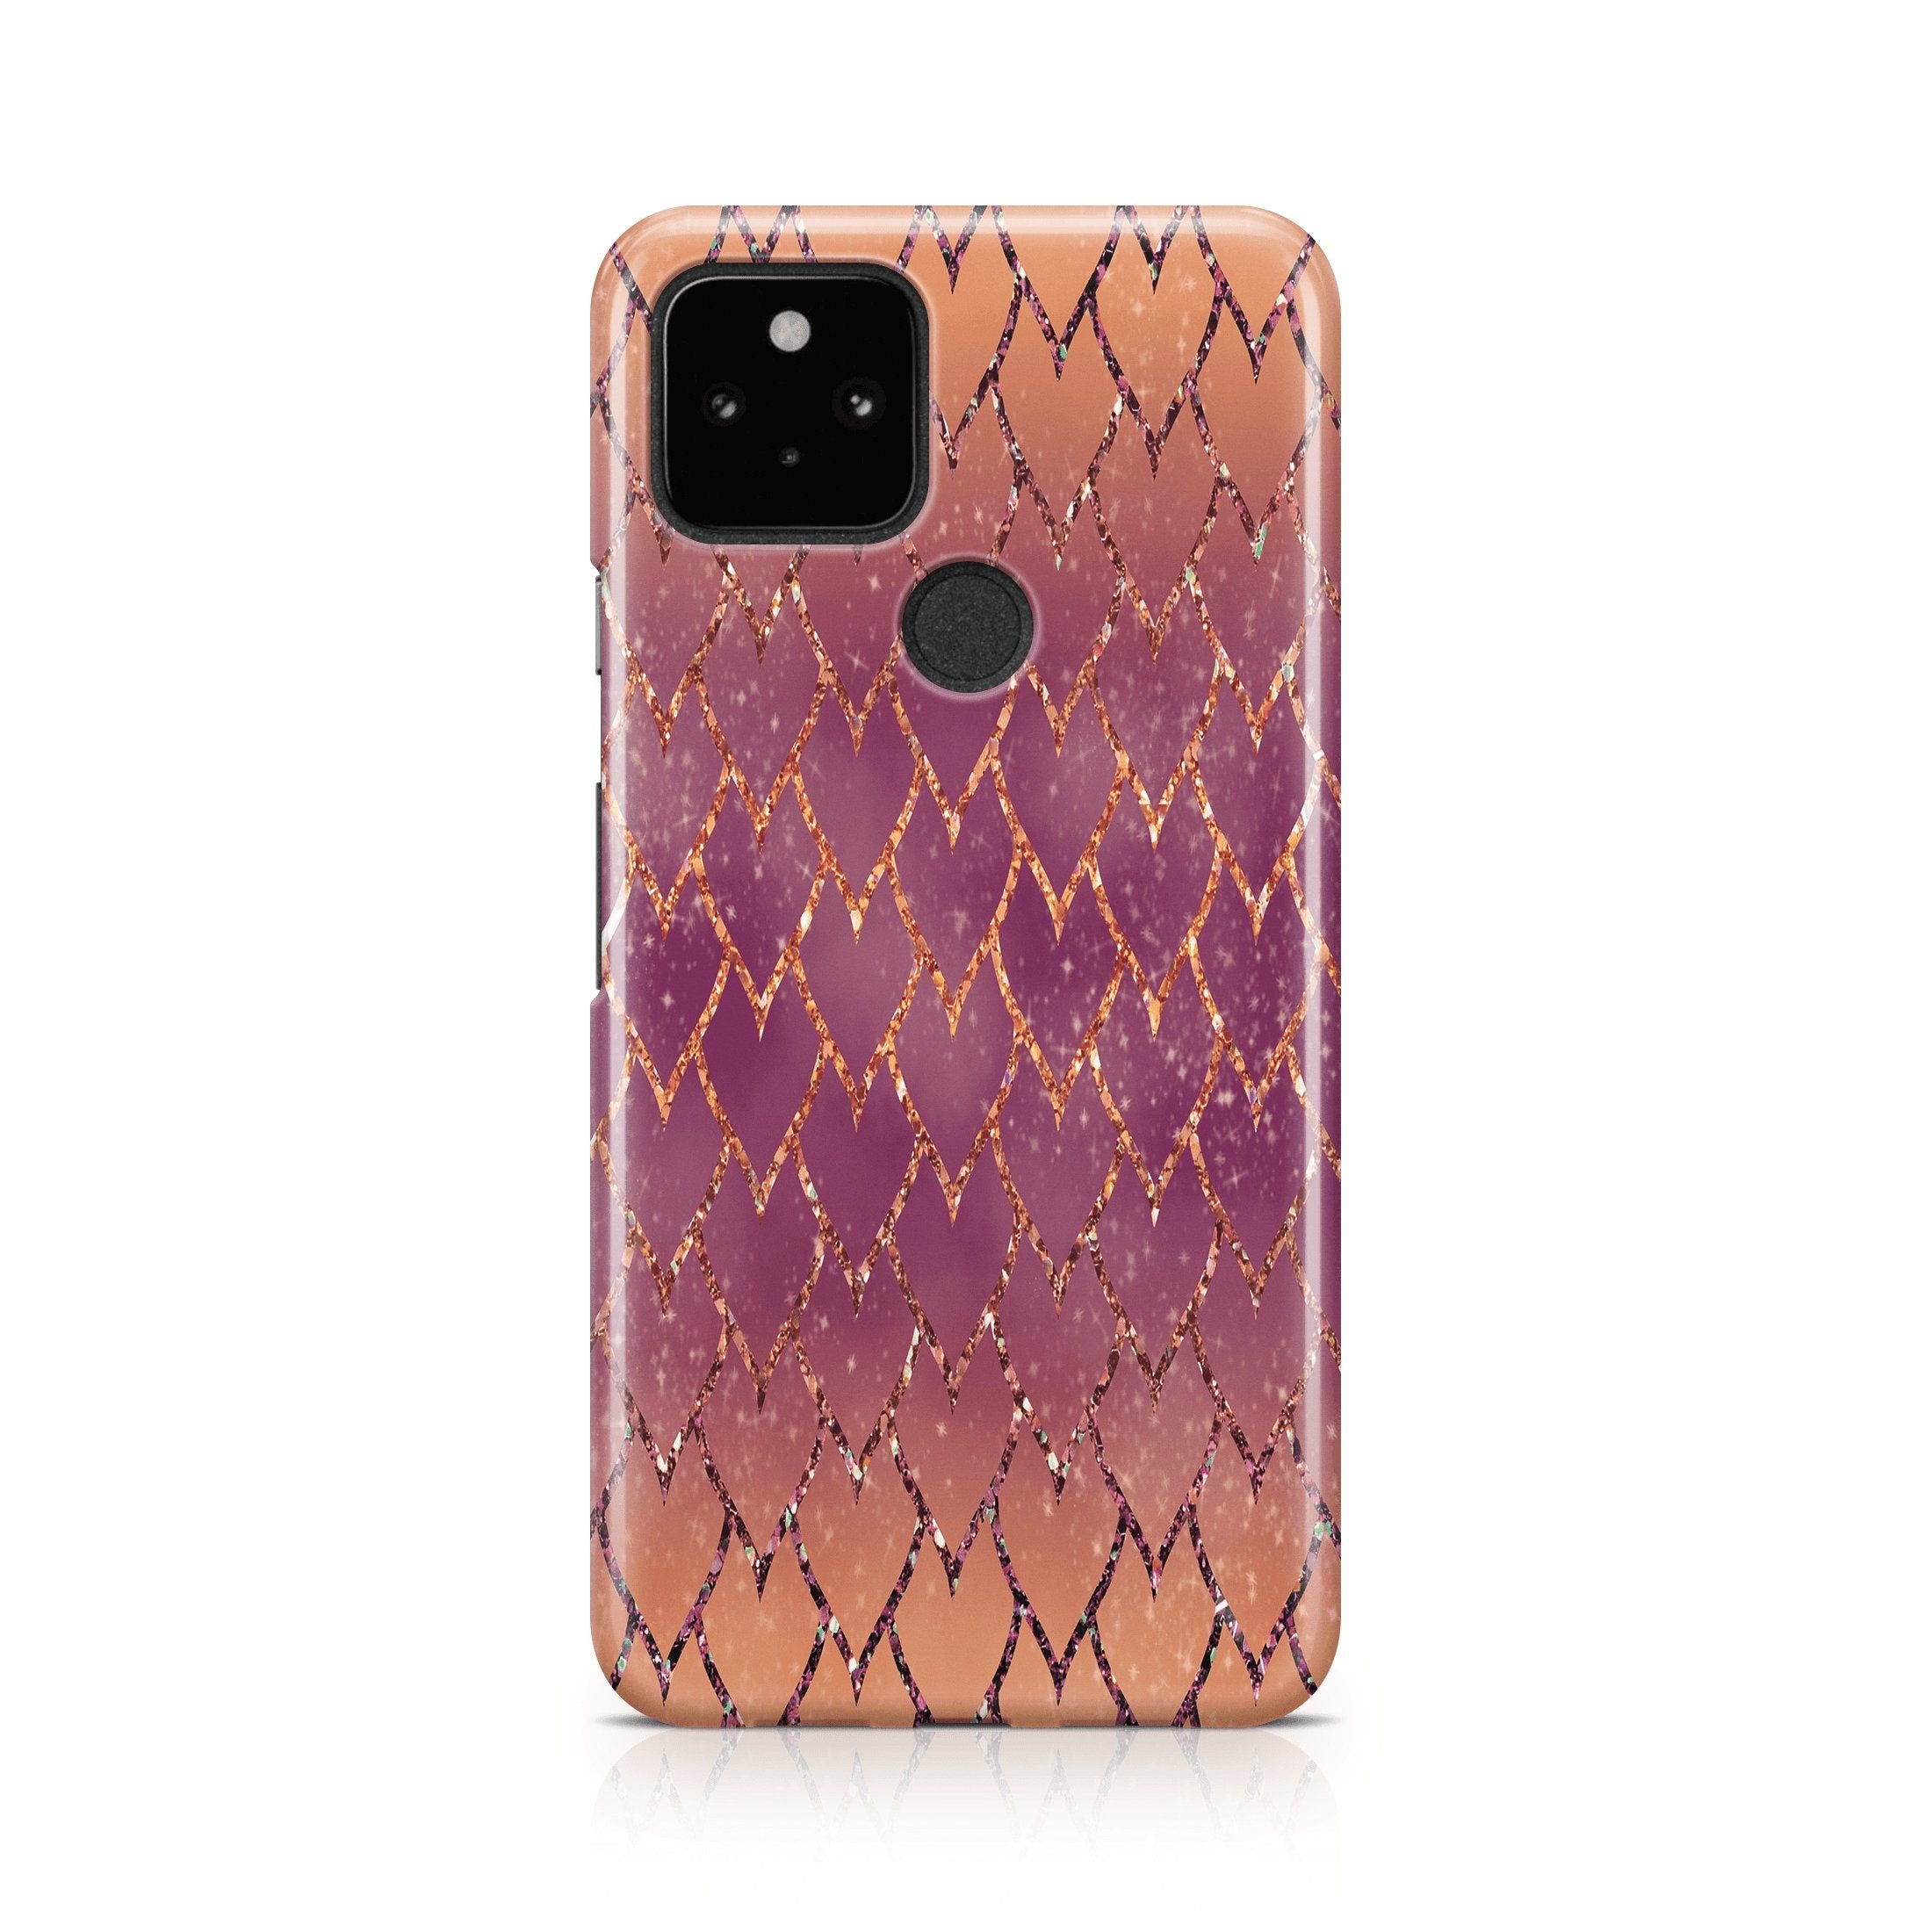 Pumpkin Spice Dragonscale - Google phone case designs by CaseSwagger